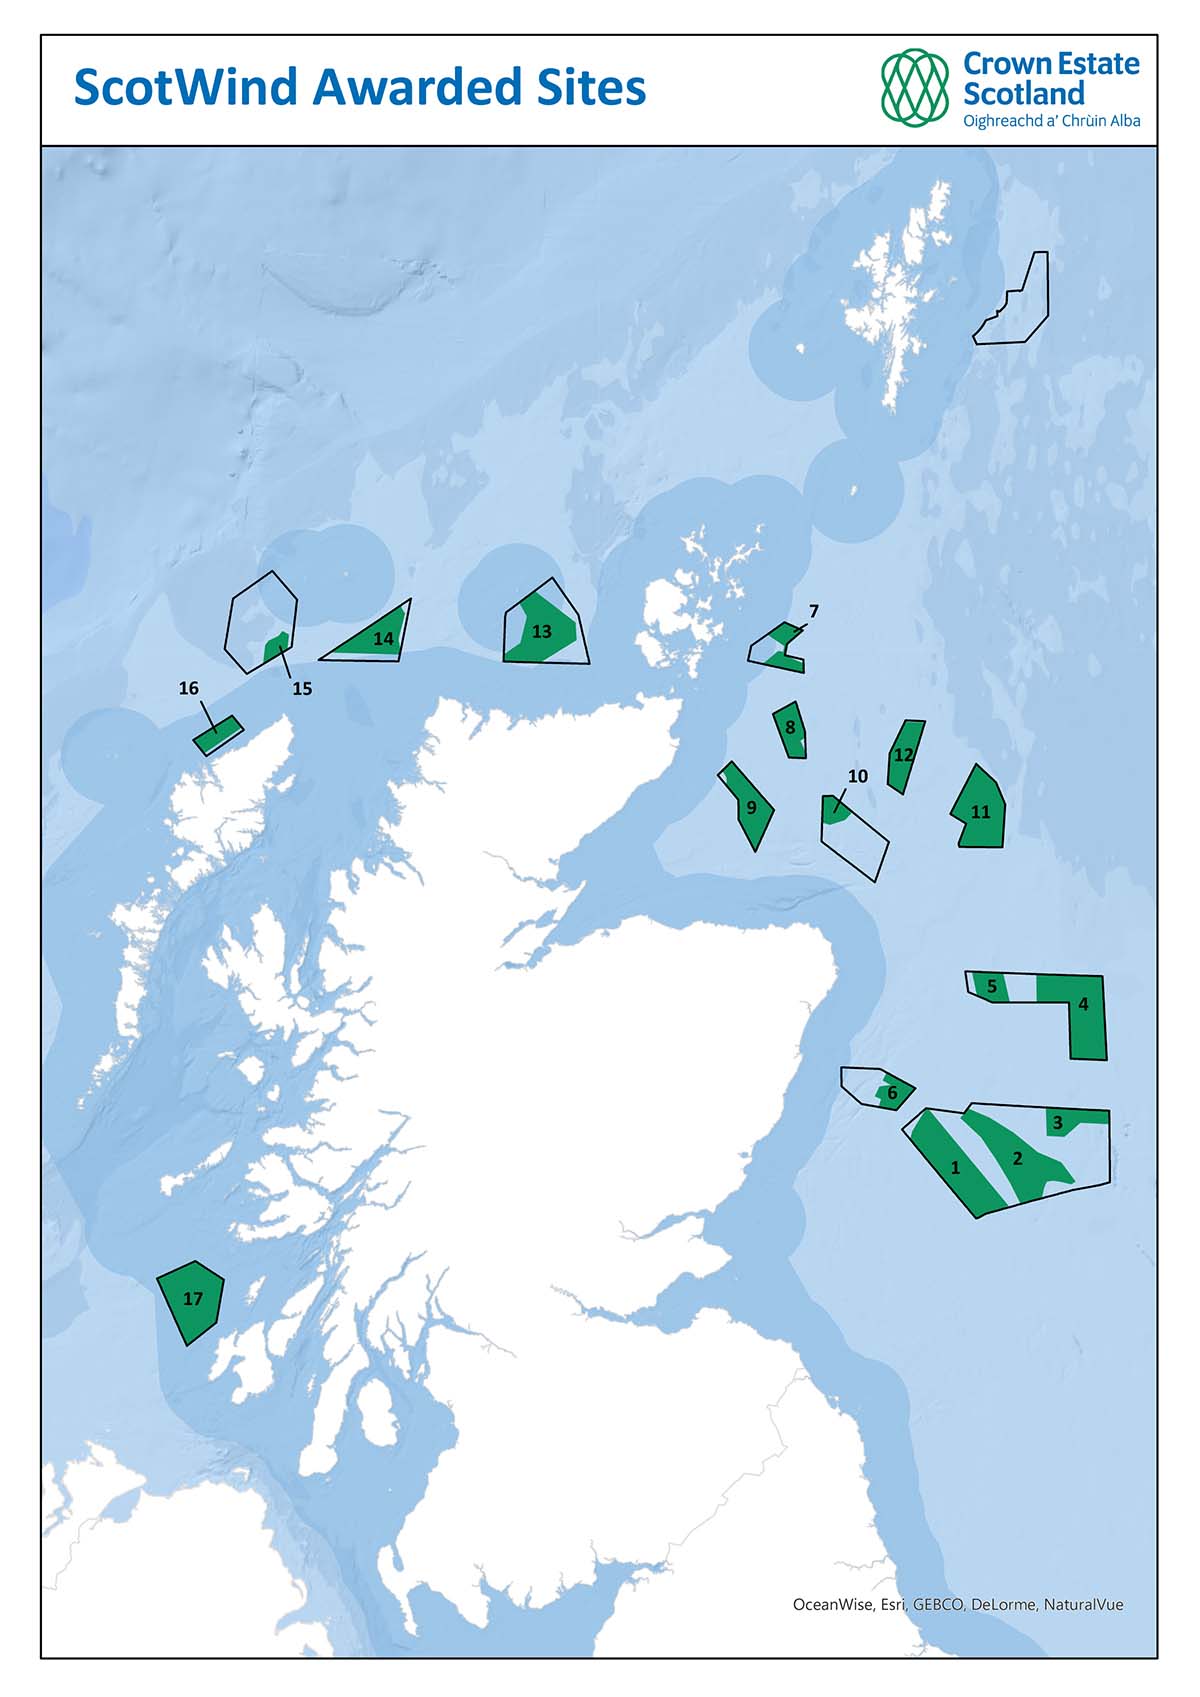 ScotWind confirms 17 new offshore wind developments